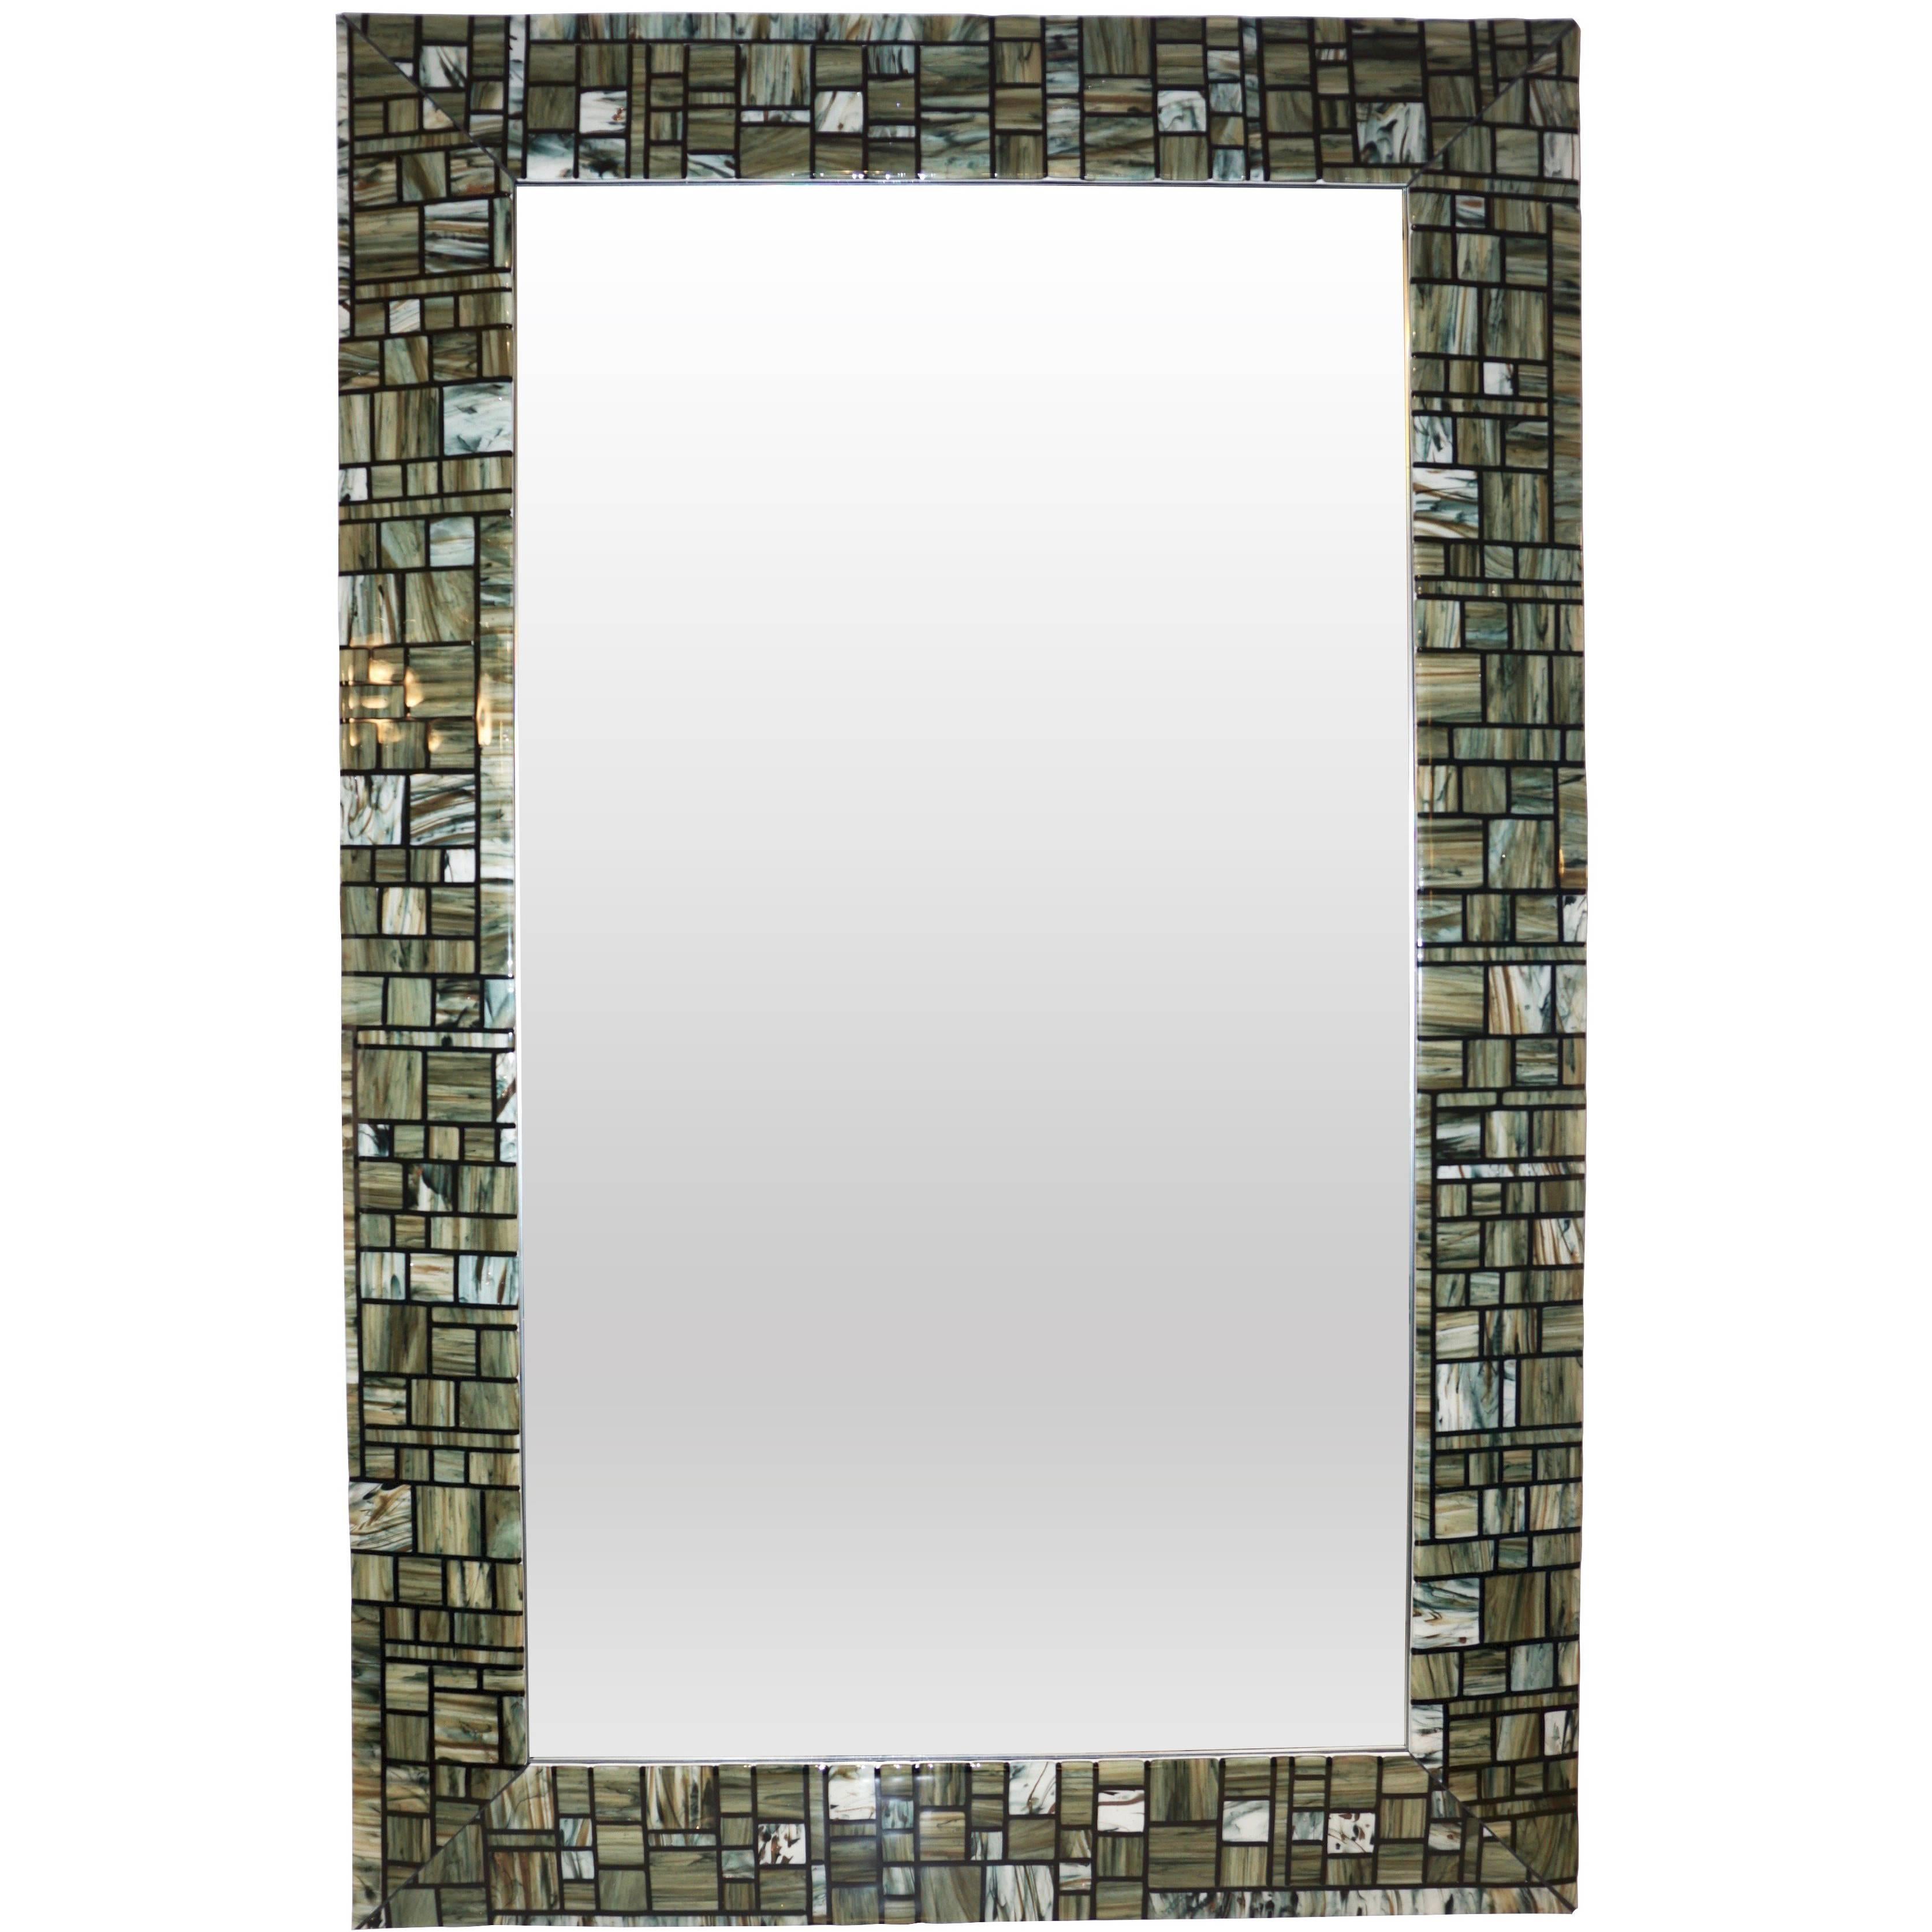 Contemporary Italian Murano glass mirror, exclusive Venetian work of art for Cosulich interiors by Veve Glass, skillfully and Masterly realized as an abstract earth tones mosaic with the Fusion technique, each individually handcrafted geometric